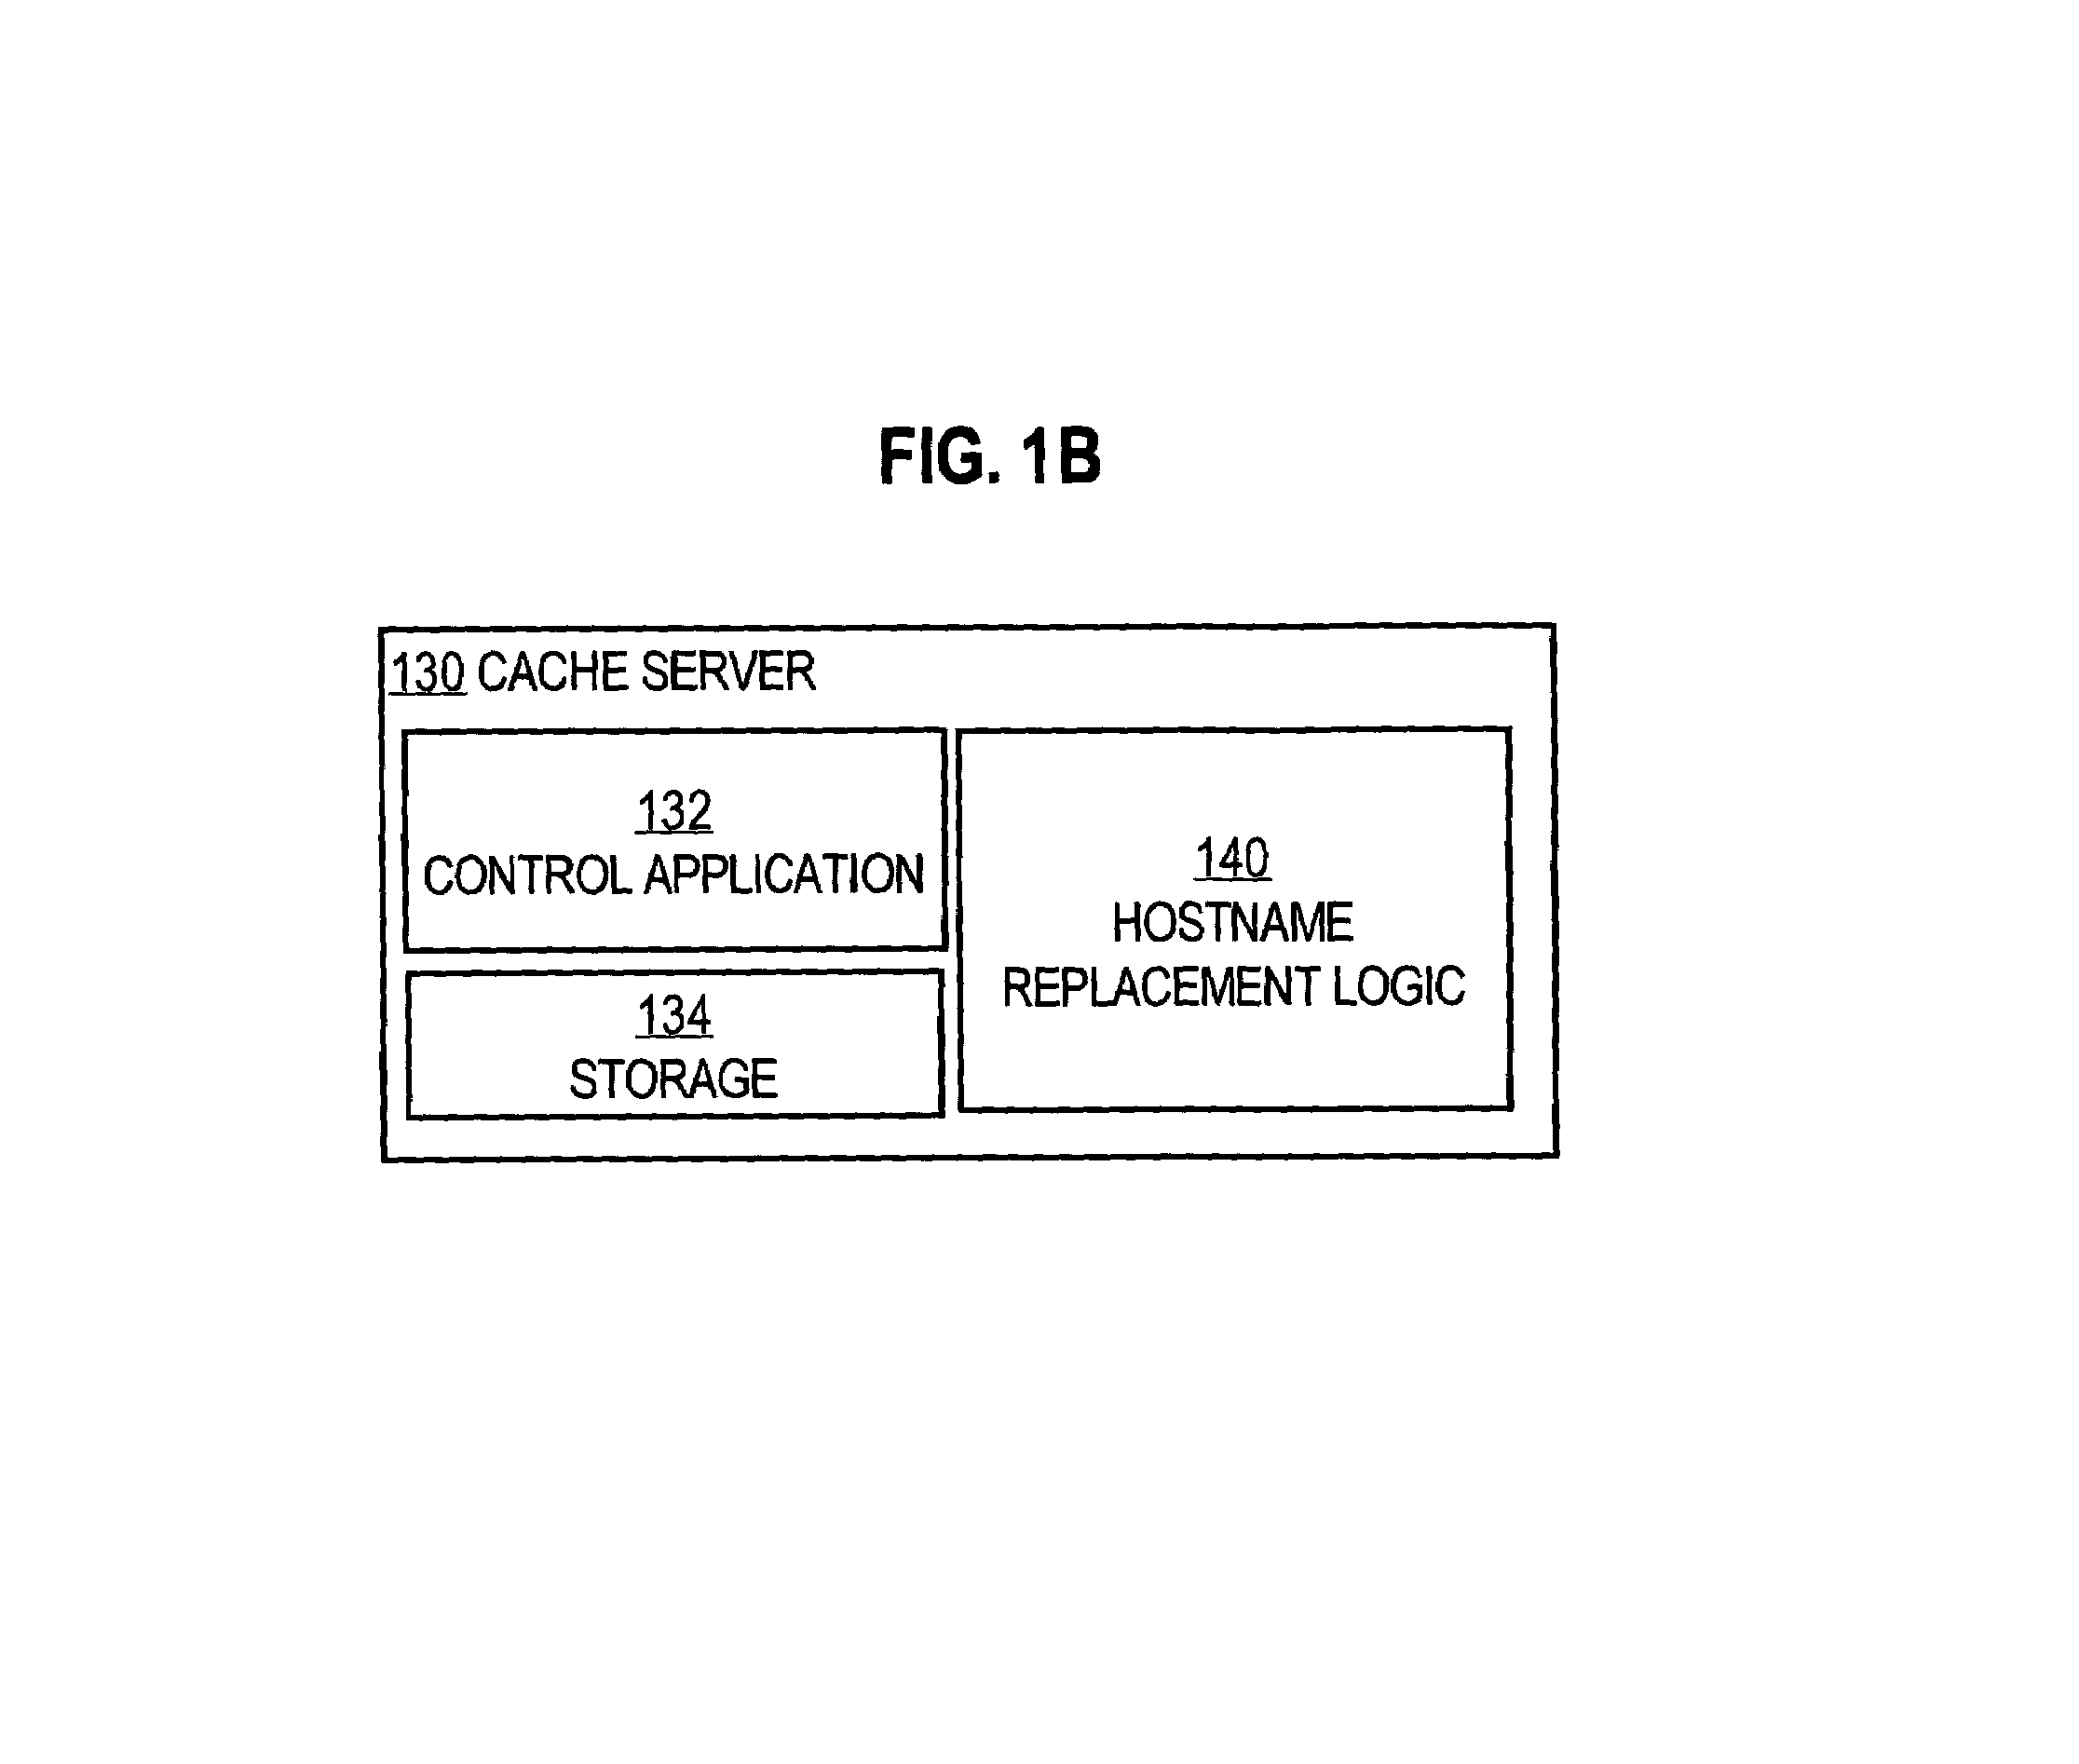 System and method of optimizing retrieval of network resources by identifying and substituting embedded symbolic host name references with network addresses in accordance with substitution policies